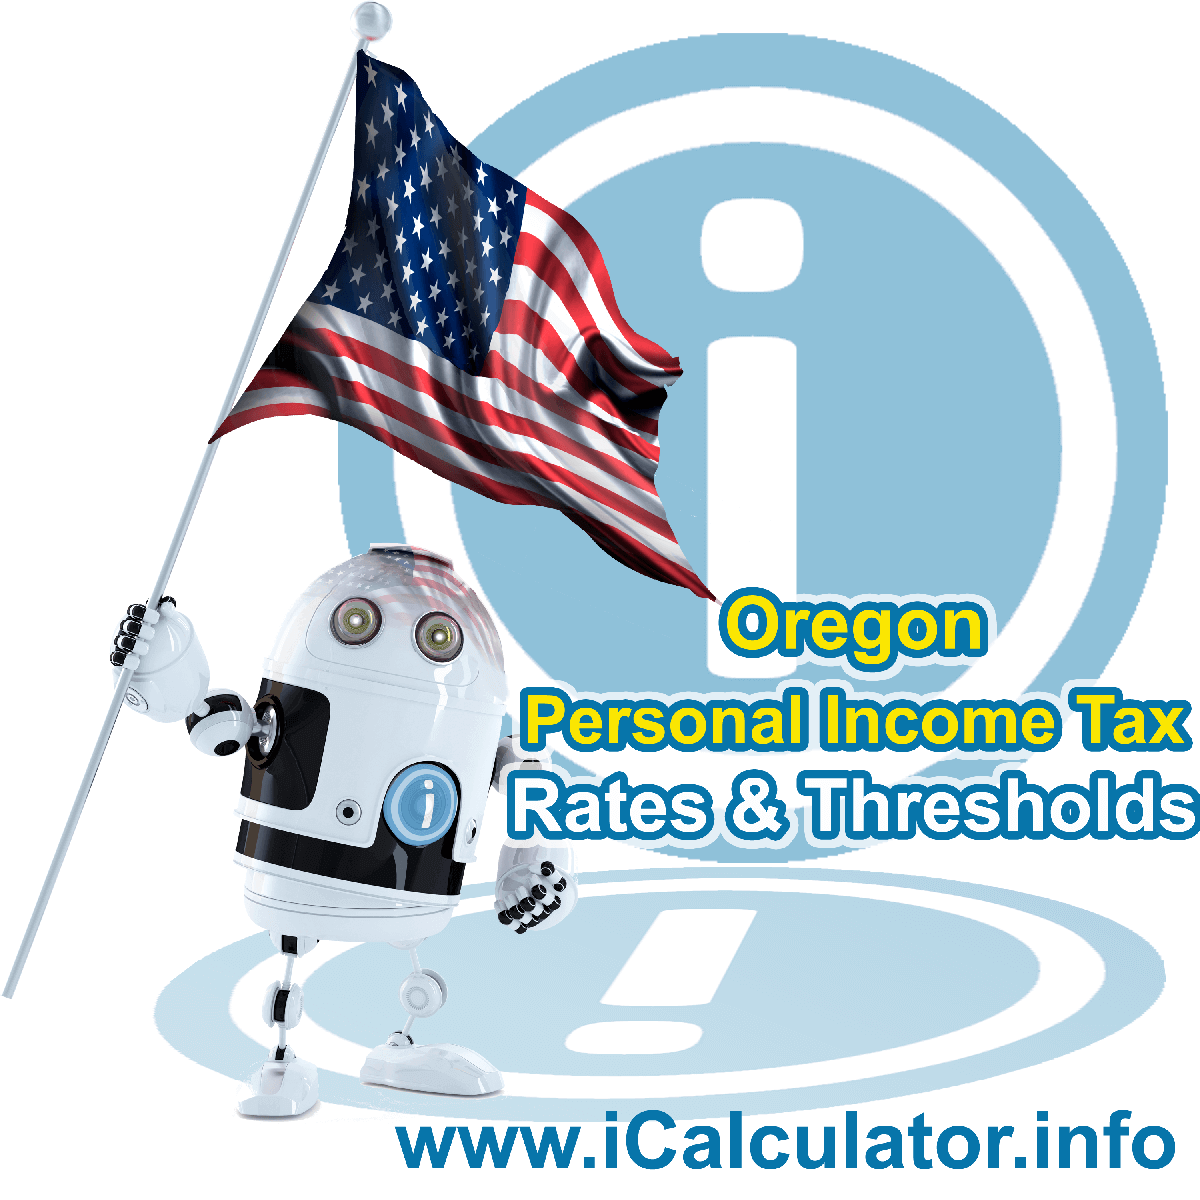 Oregon State Tax Tables 2018. This image displays details of the Oregon State Tax Tables for the 2018 tax return year which is provided in support of the 2018 US Tax Calculator